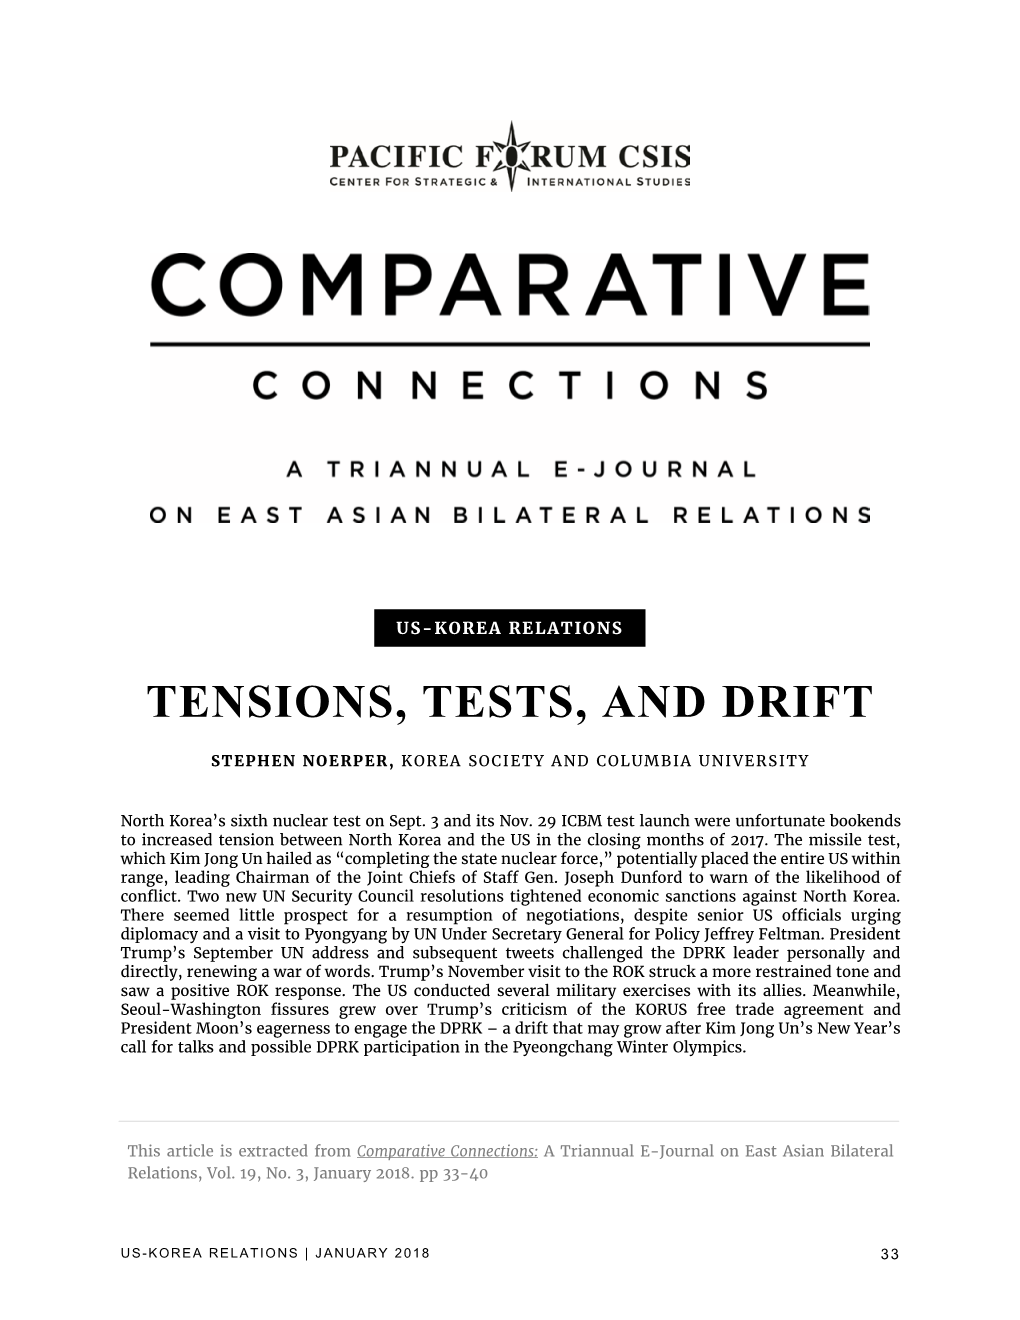 Tensions, Tests, and Drift